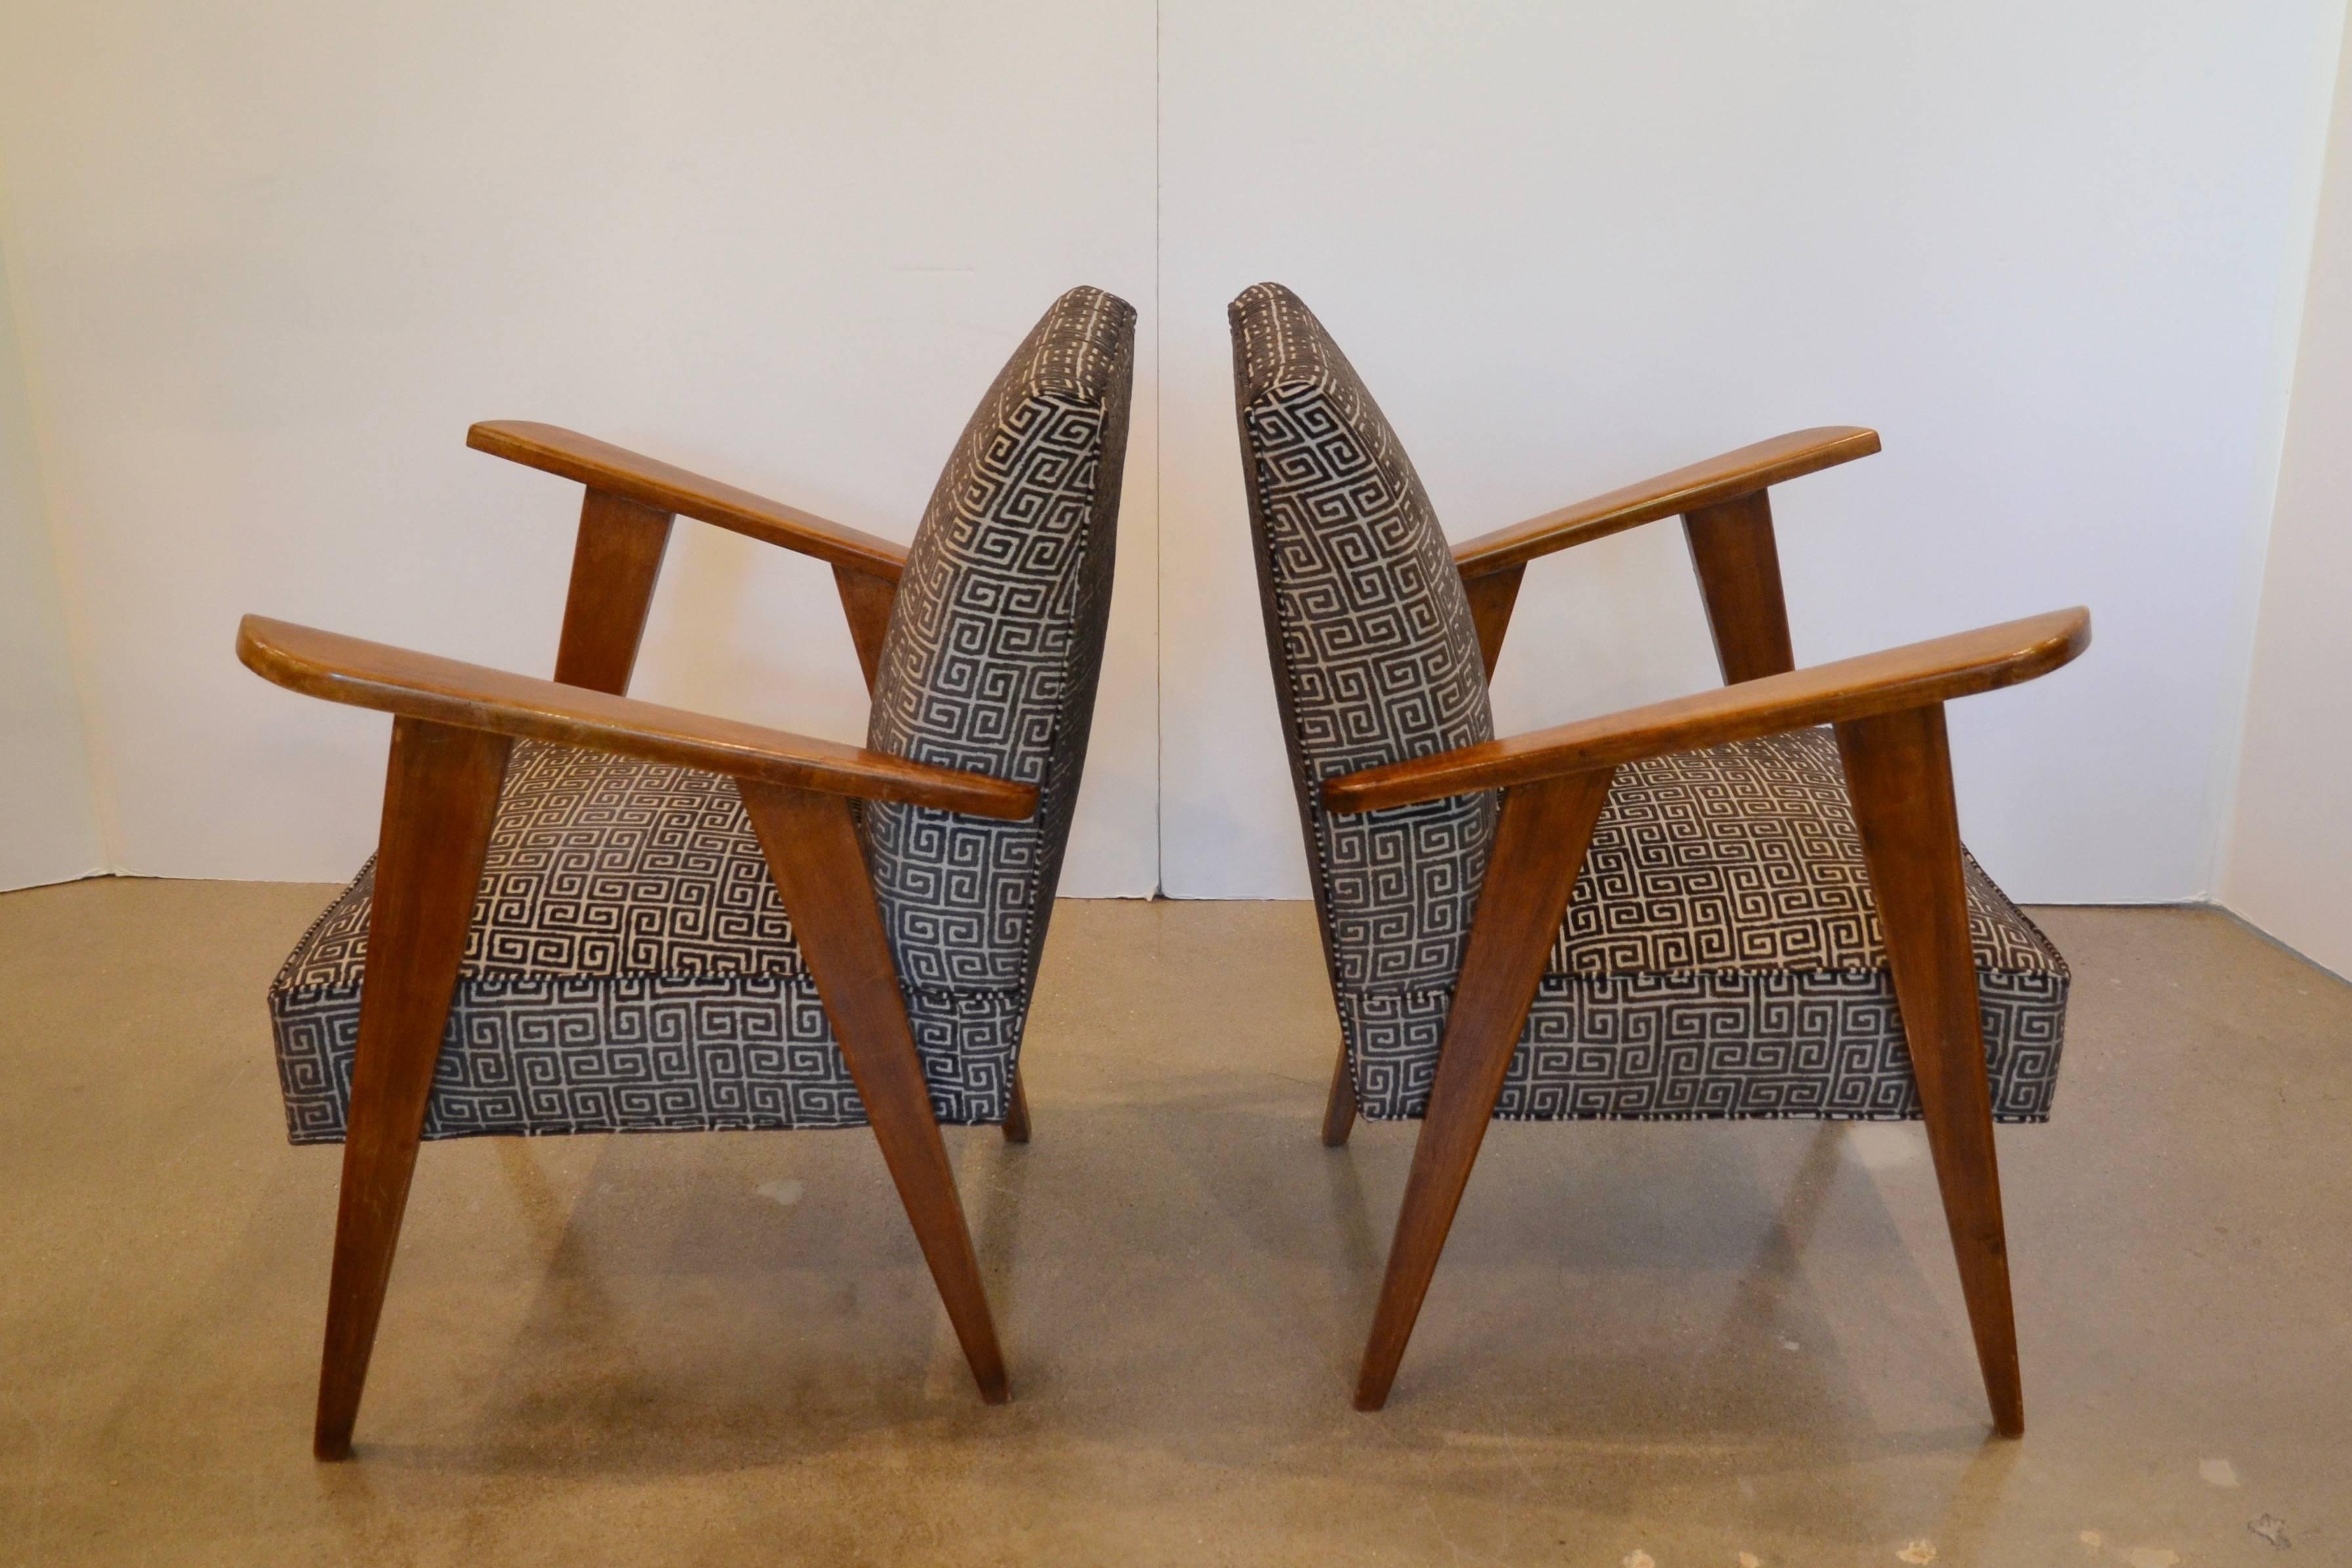 Handsome Italian Mid-Century Modern chairs, circa 1950, with open arms on angular frame reminiscent of Jeanneret.  New custom Greek key upholstery in black and tan cut velvet.  Very comfortable.